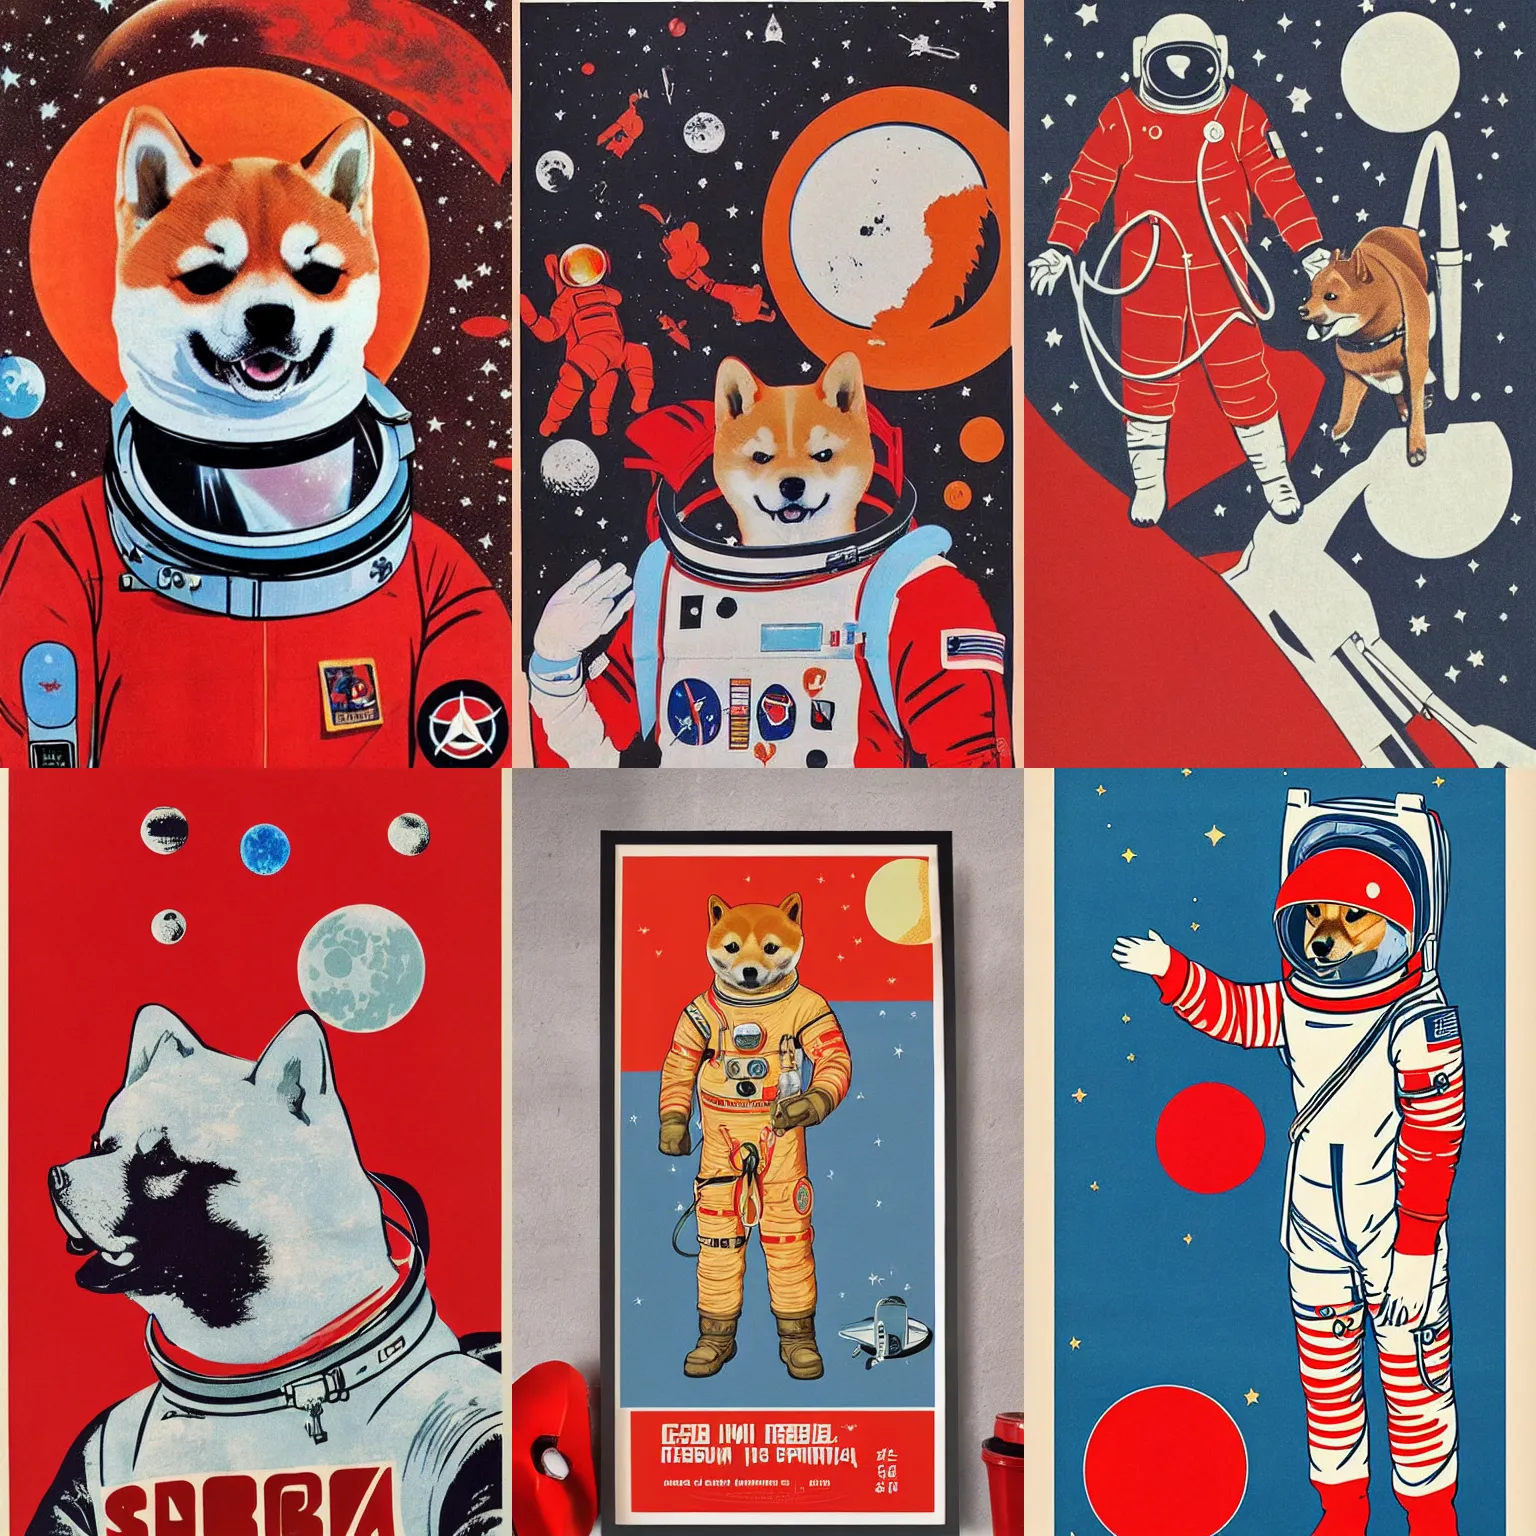 Prompt: Shiba Inu cosmonaut portrait, Red spacesuit,moon mission, 60s poster, 1968 Soviet Japanese